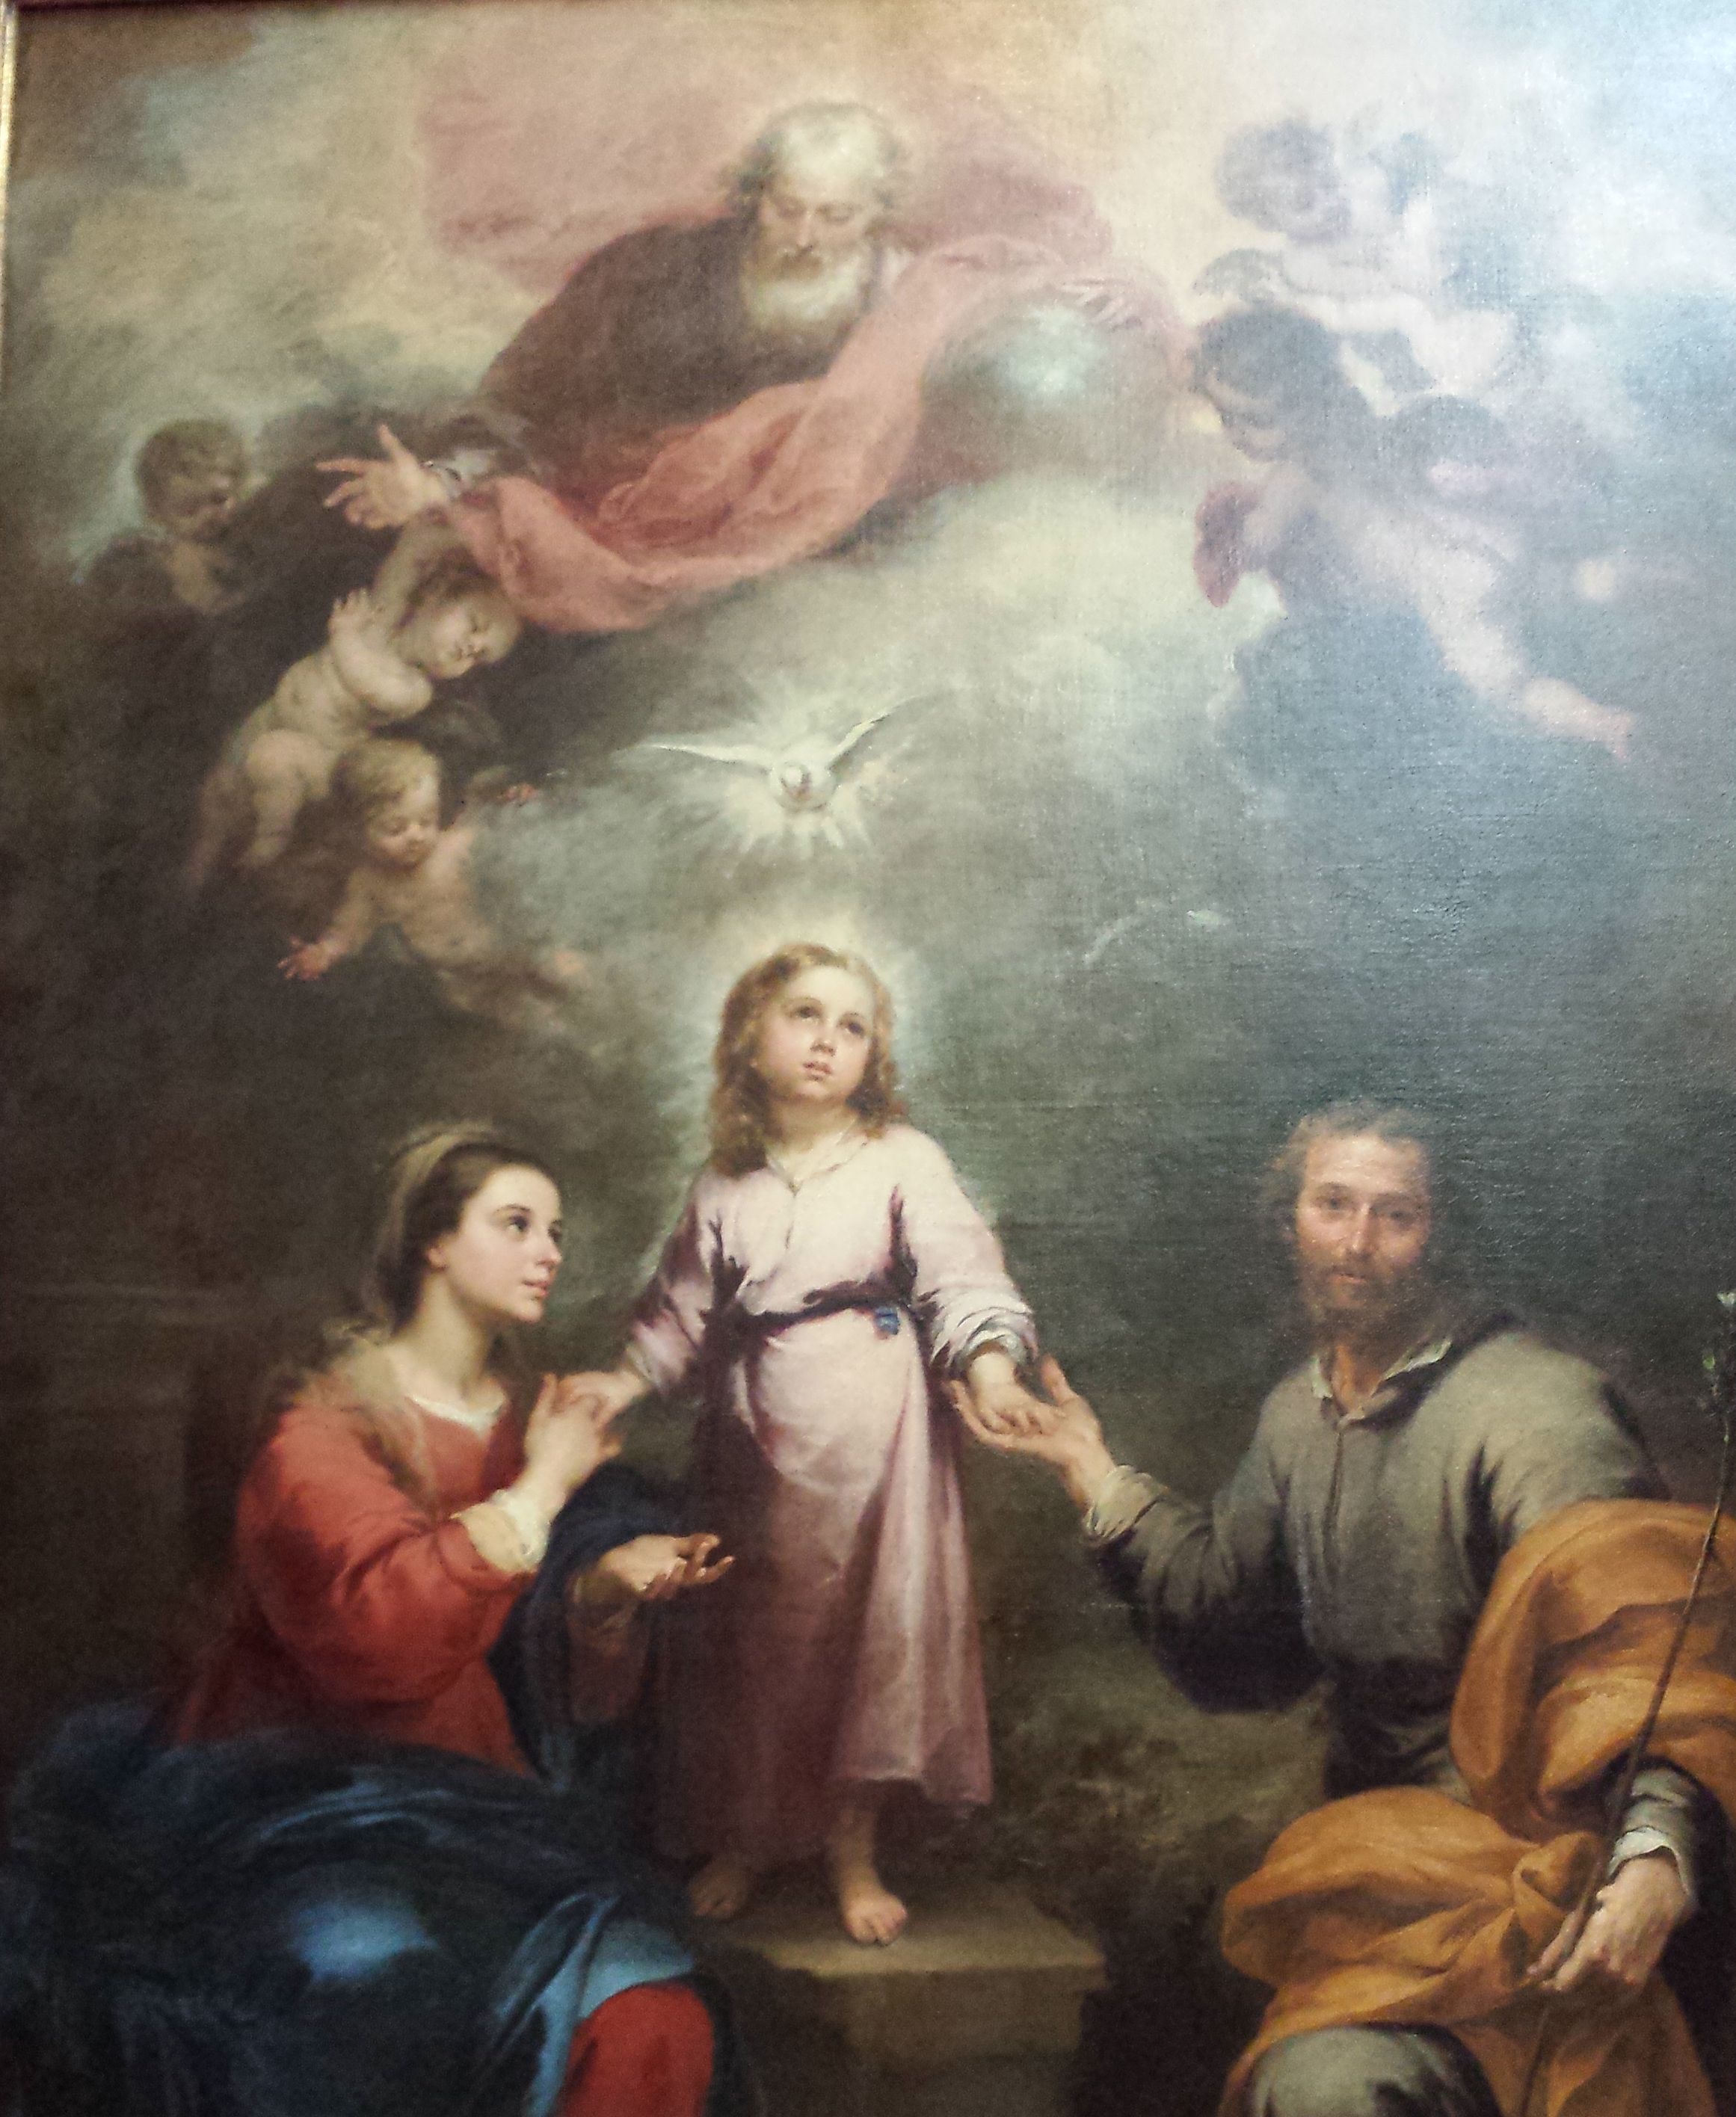 image of St Joseph to Tug at Your Heartstrings By His Pierced Hands